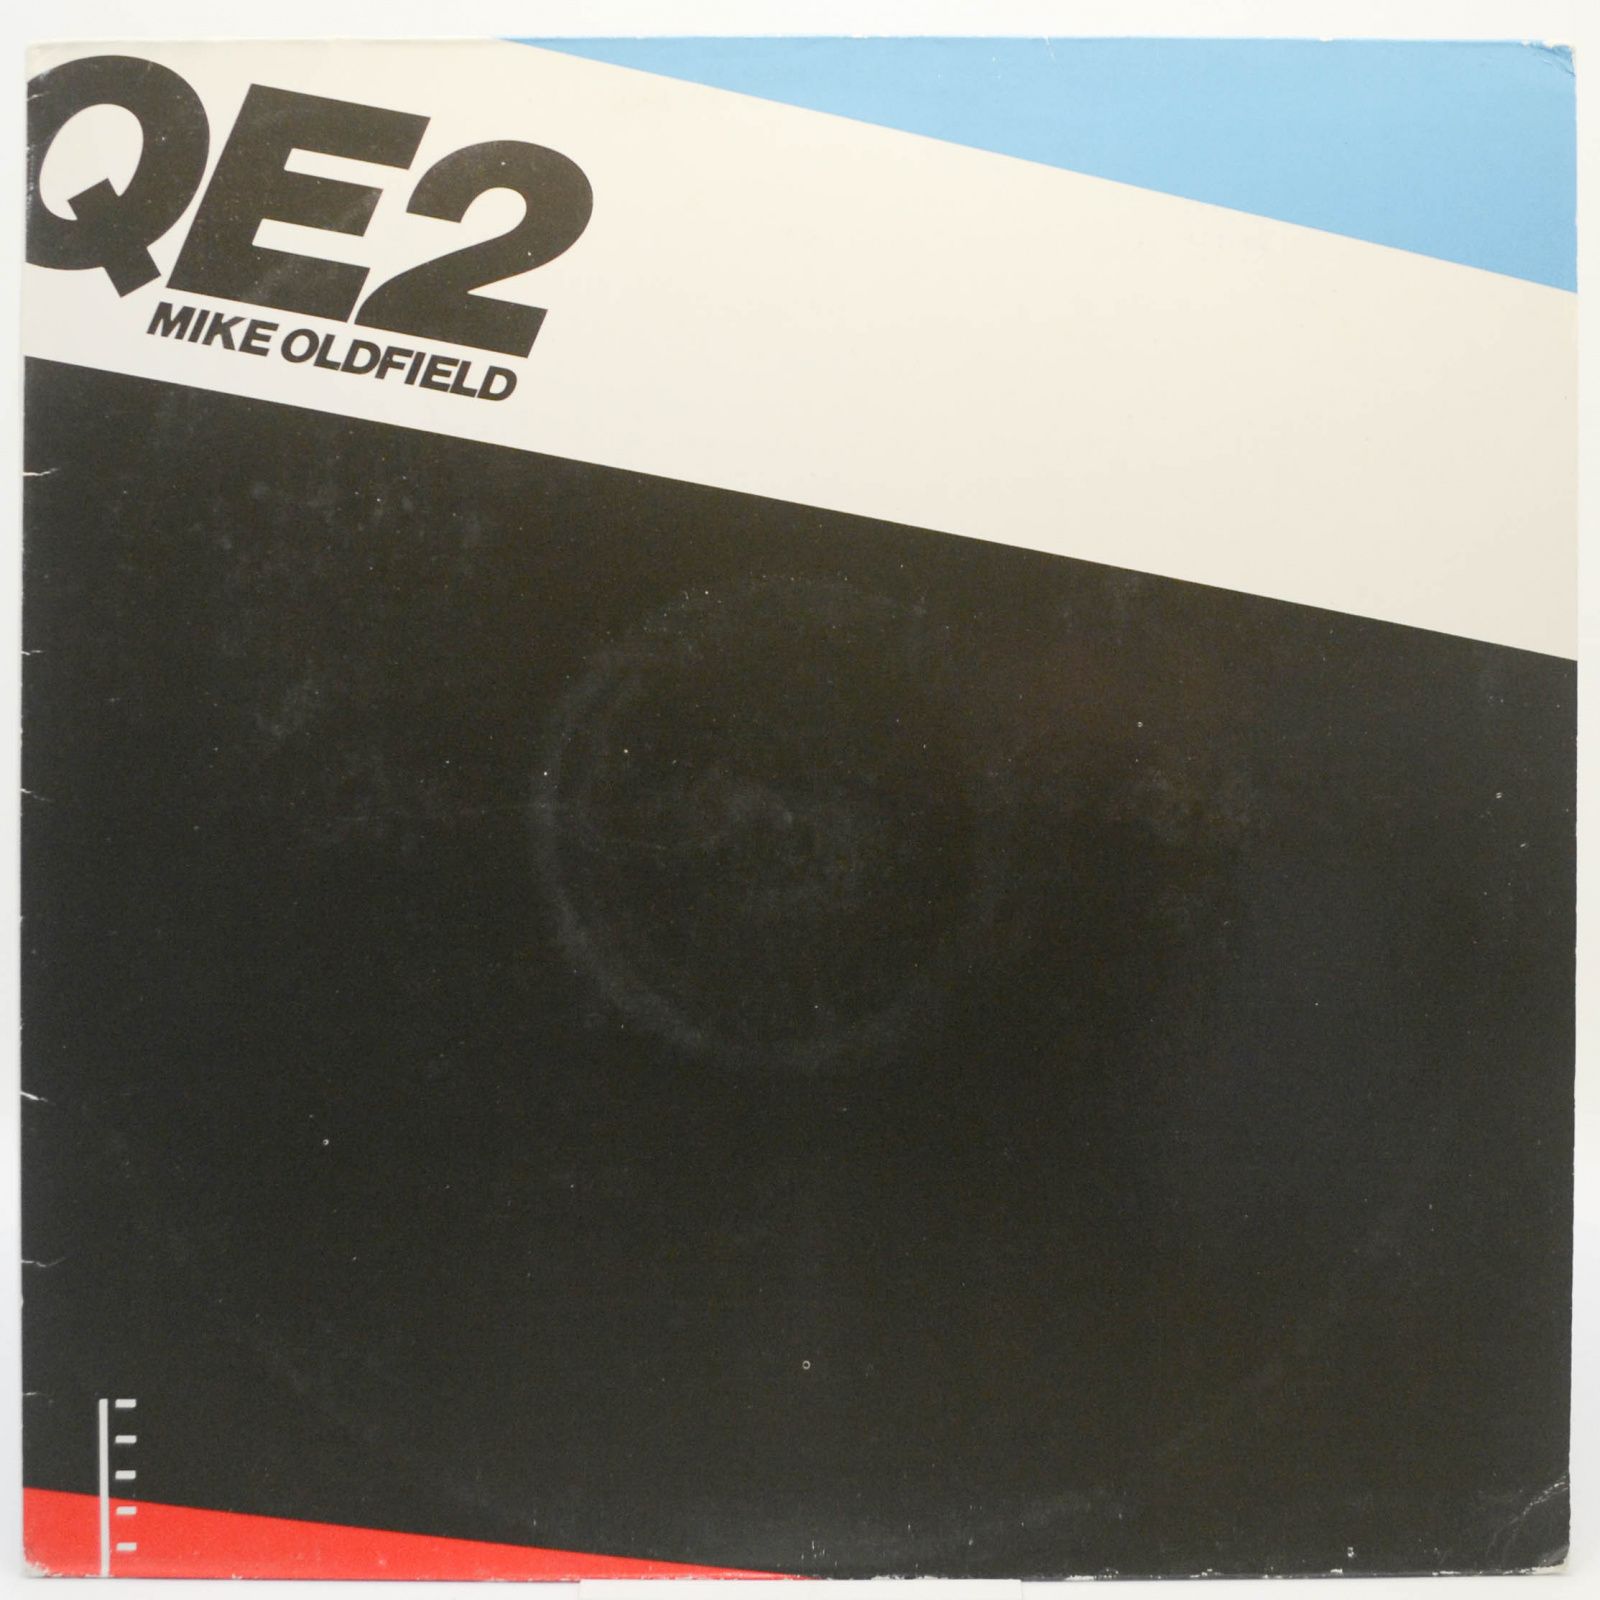 Mike Oldfield — QE2, 1980